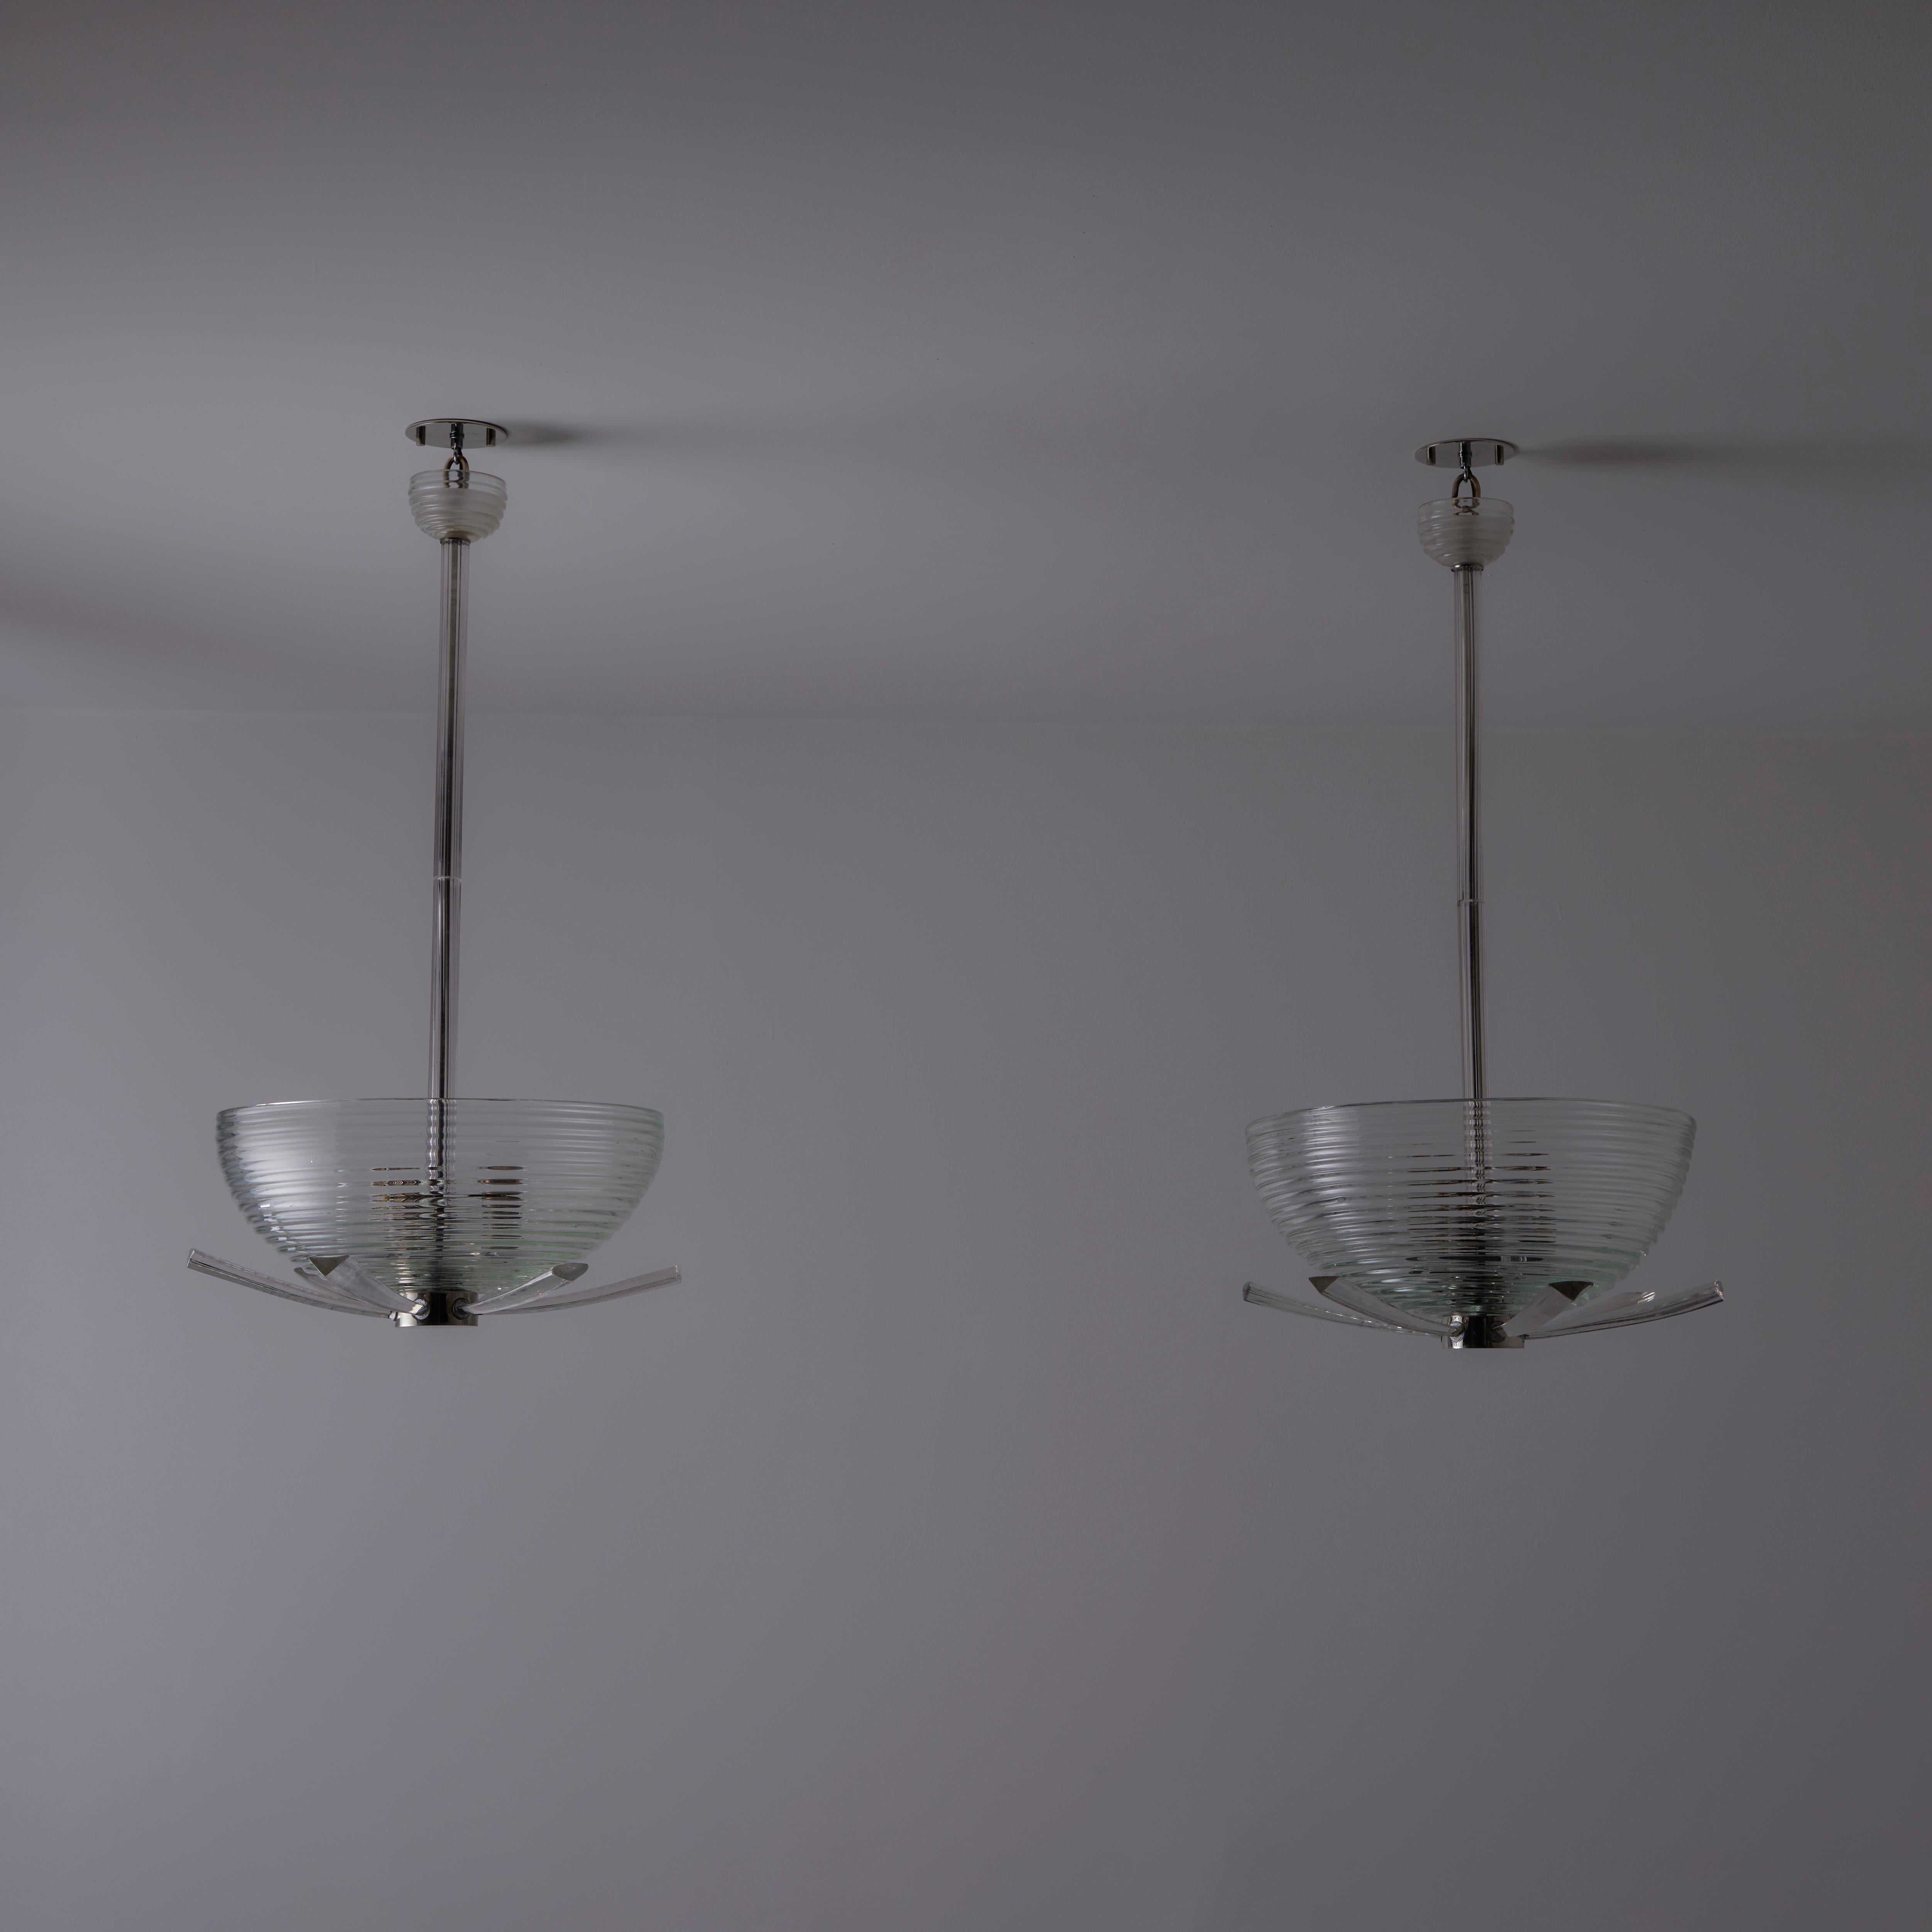 Ceiling Lights by Seguso. Designed and manufactured in Italy, circa the 1940s. All glass pendants with Murano glass blown bowls, glass ribbed stem and glass arms for an added detail on the bottom relief. Each pendant holds a tri-socket consisting of